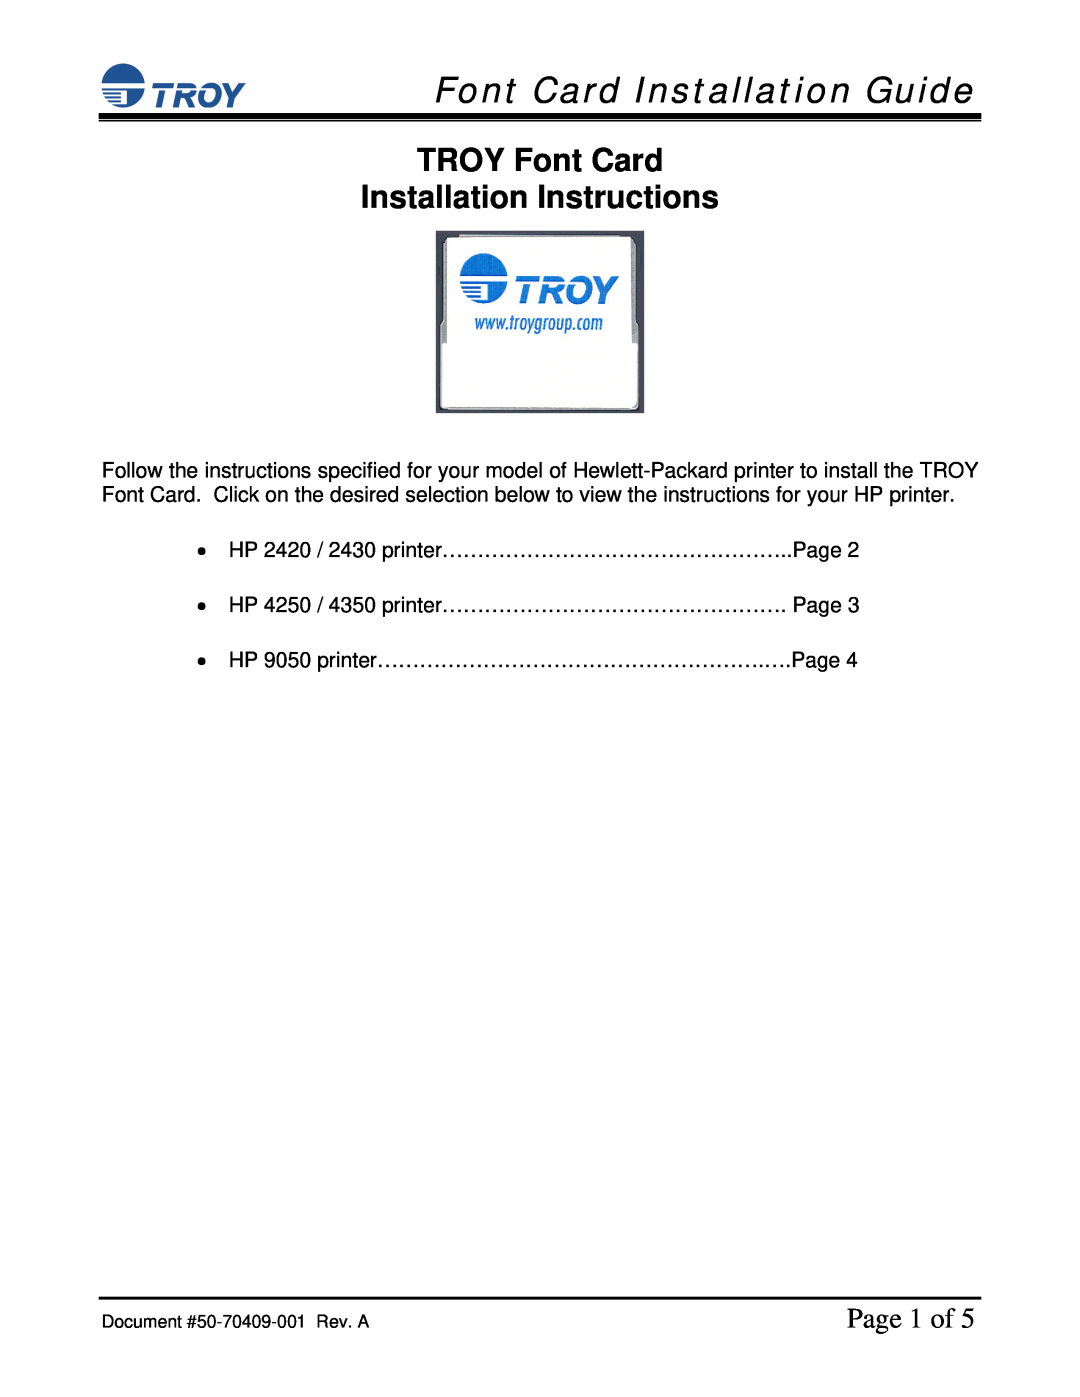 TROY Group HP 4250 / 4350, HP 9050, HP 2420 / 2430 installation instructions Font Card Installation Guide, Page 1 of 